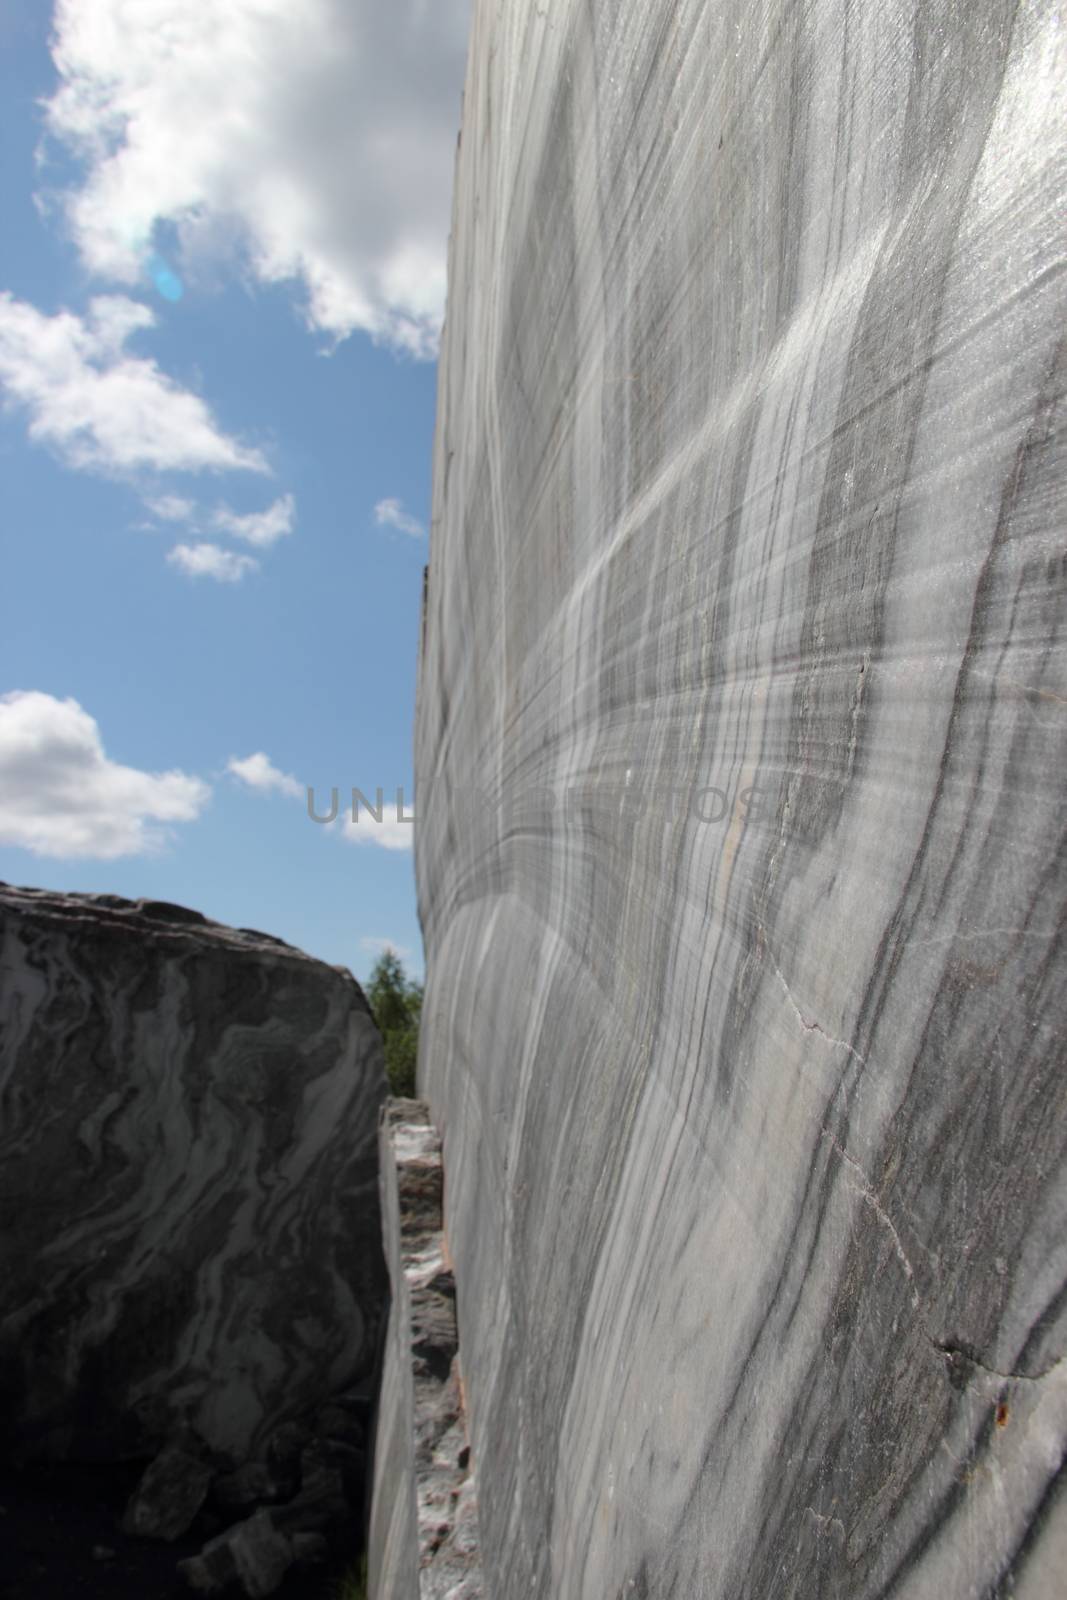 The giant marble cut in the Italian's career in Russia. Minerals